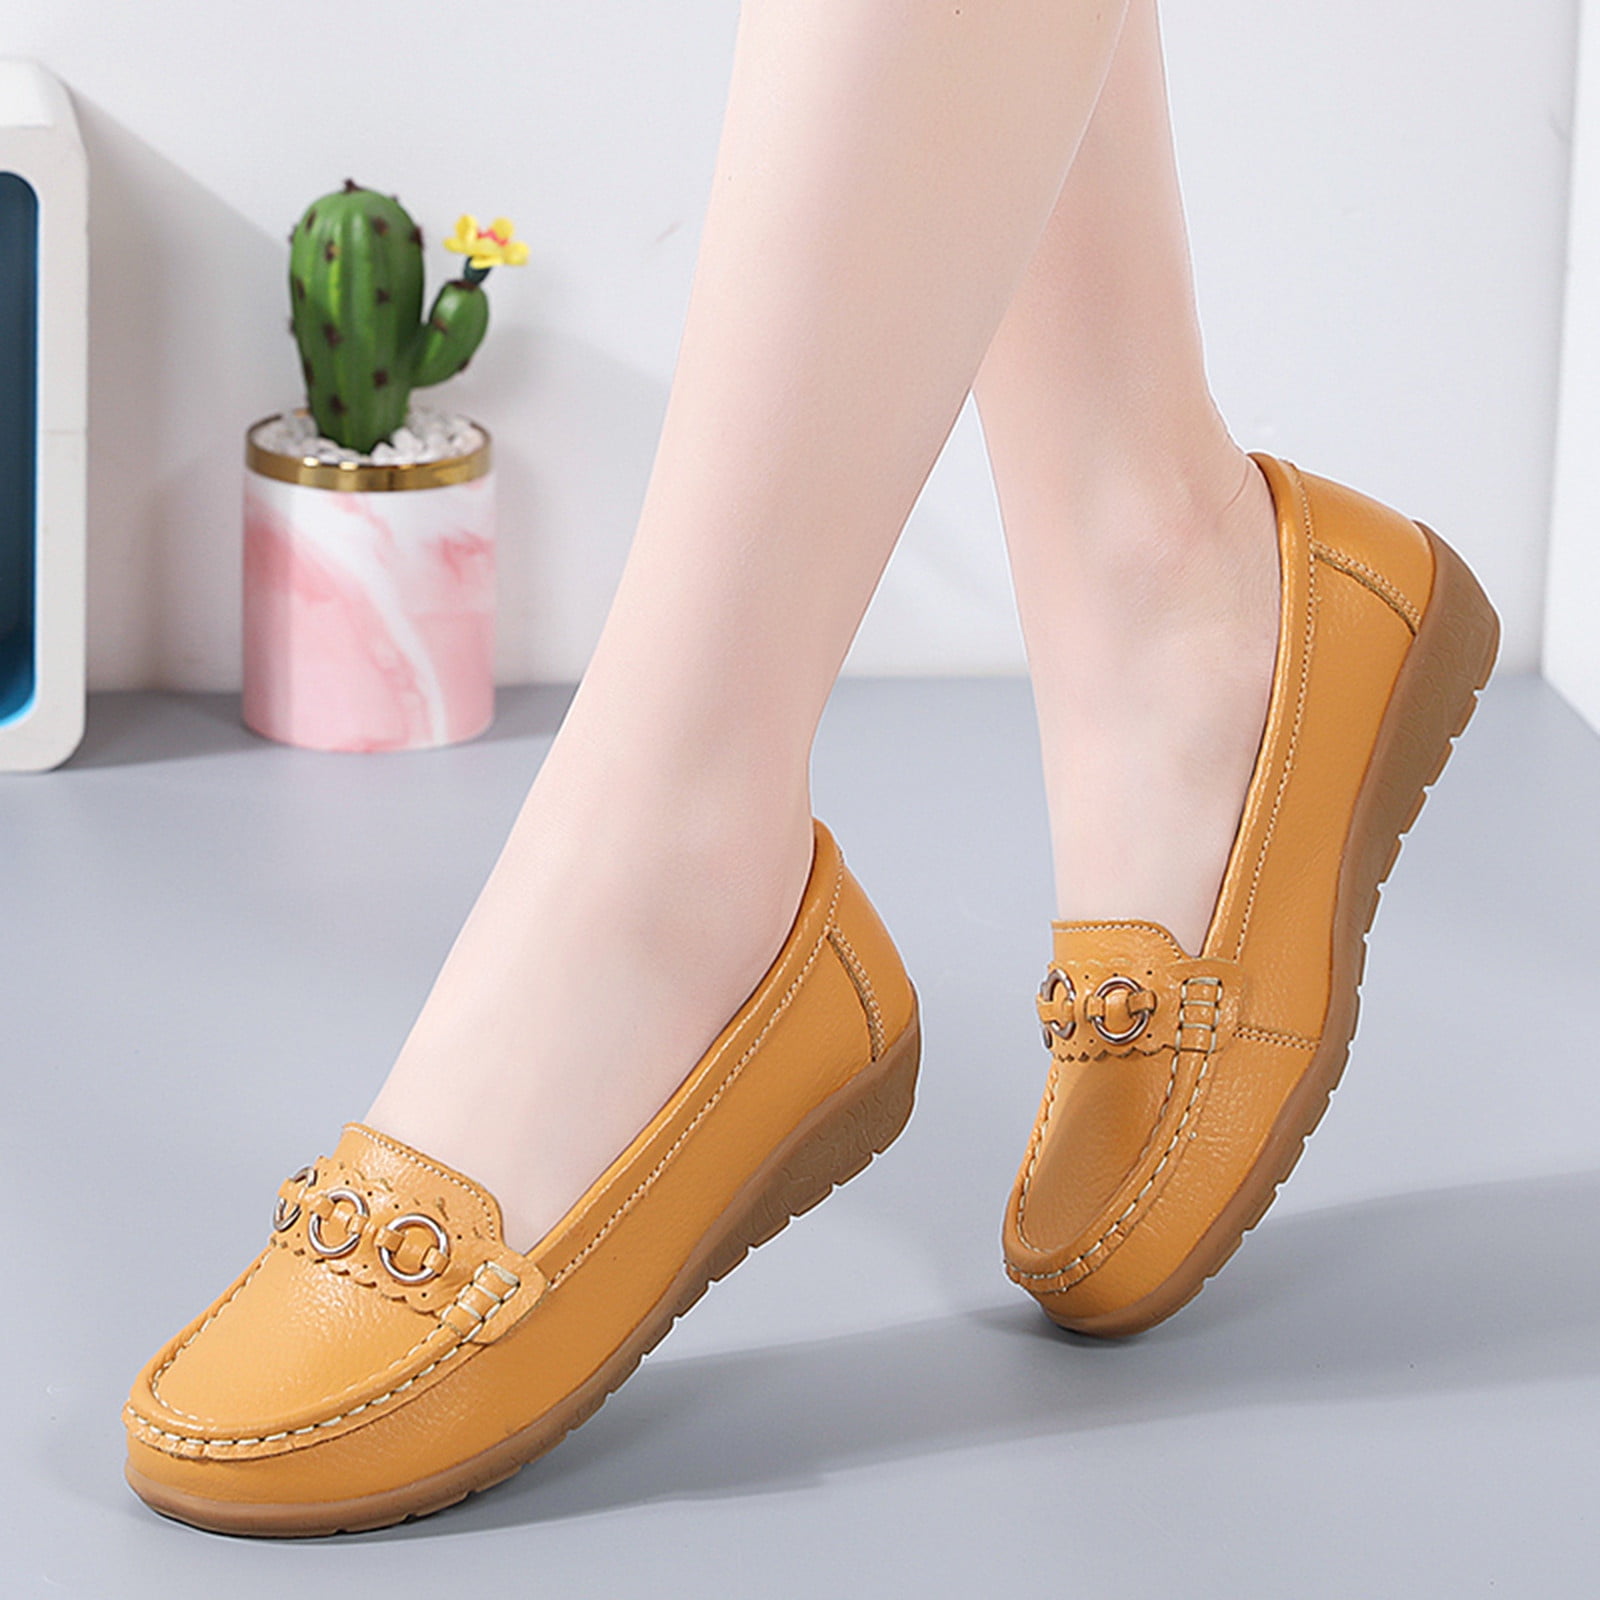 TOWED22 Womens Flat Shoes,Women's Flats Pointed Toe Ballet Shoes Knit Dress  Shoes Low Wedge Slip On Walking Office Business Loafers,Yellow 